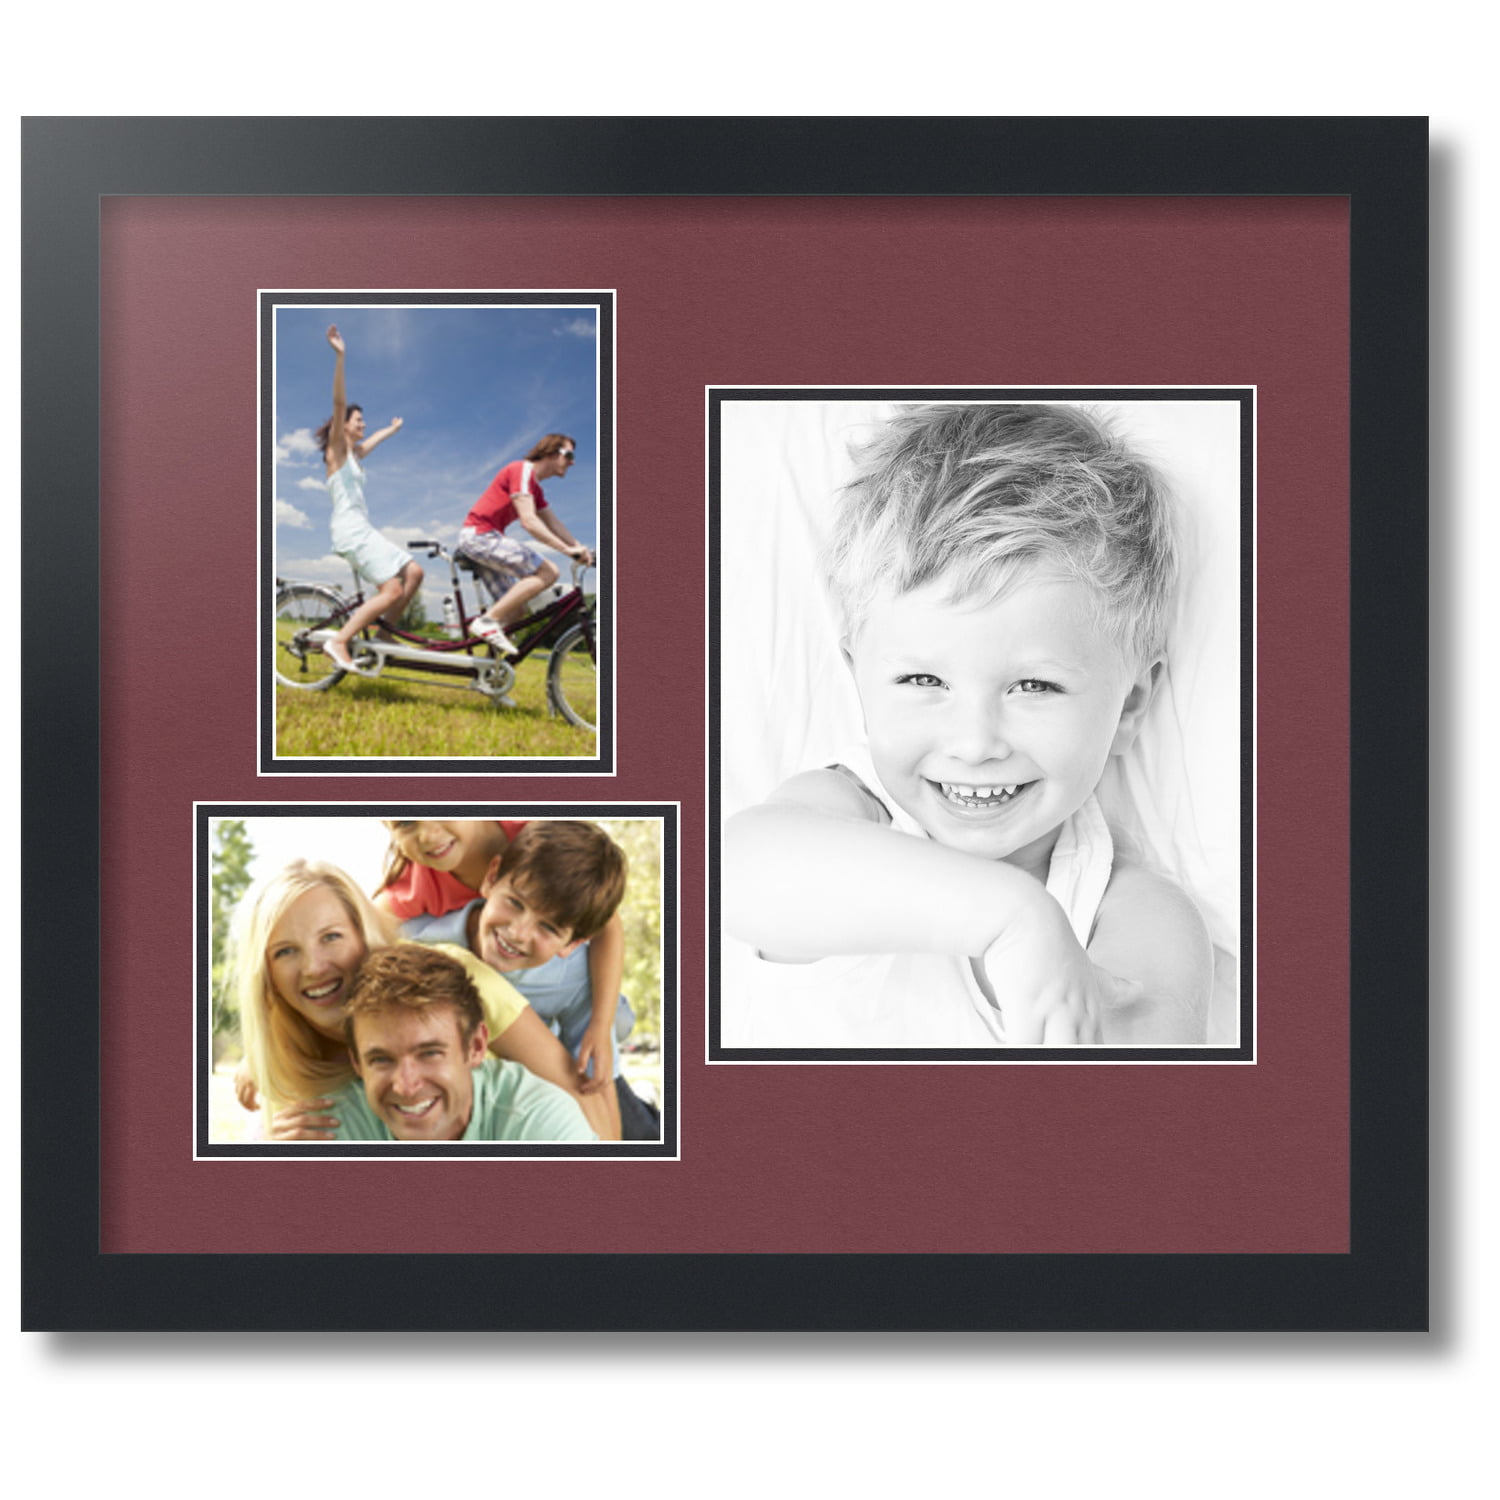 4x6 Openings with Satin Black Frame and Scotch Mist mat. ArtToFrames Collage Photo Frame Double Mat with 2-5x7 